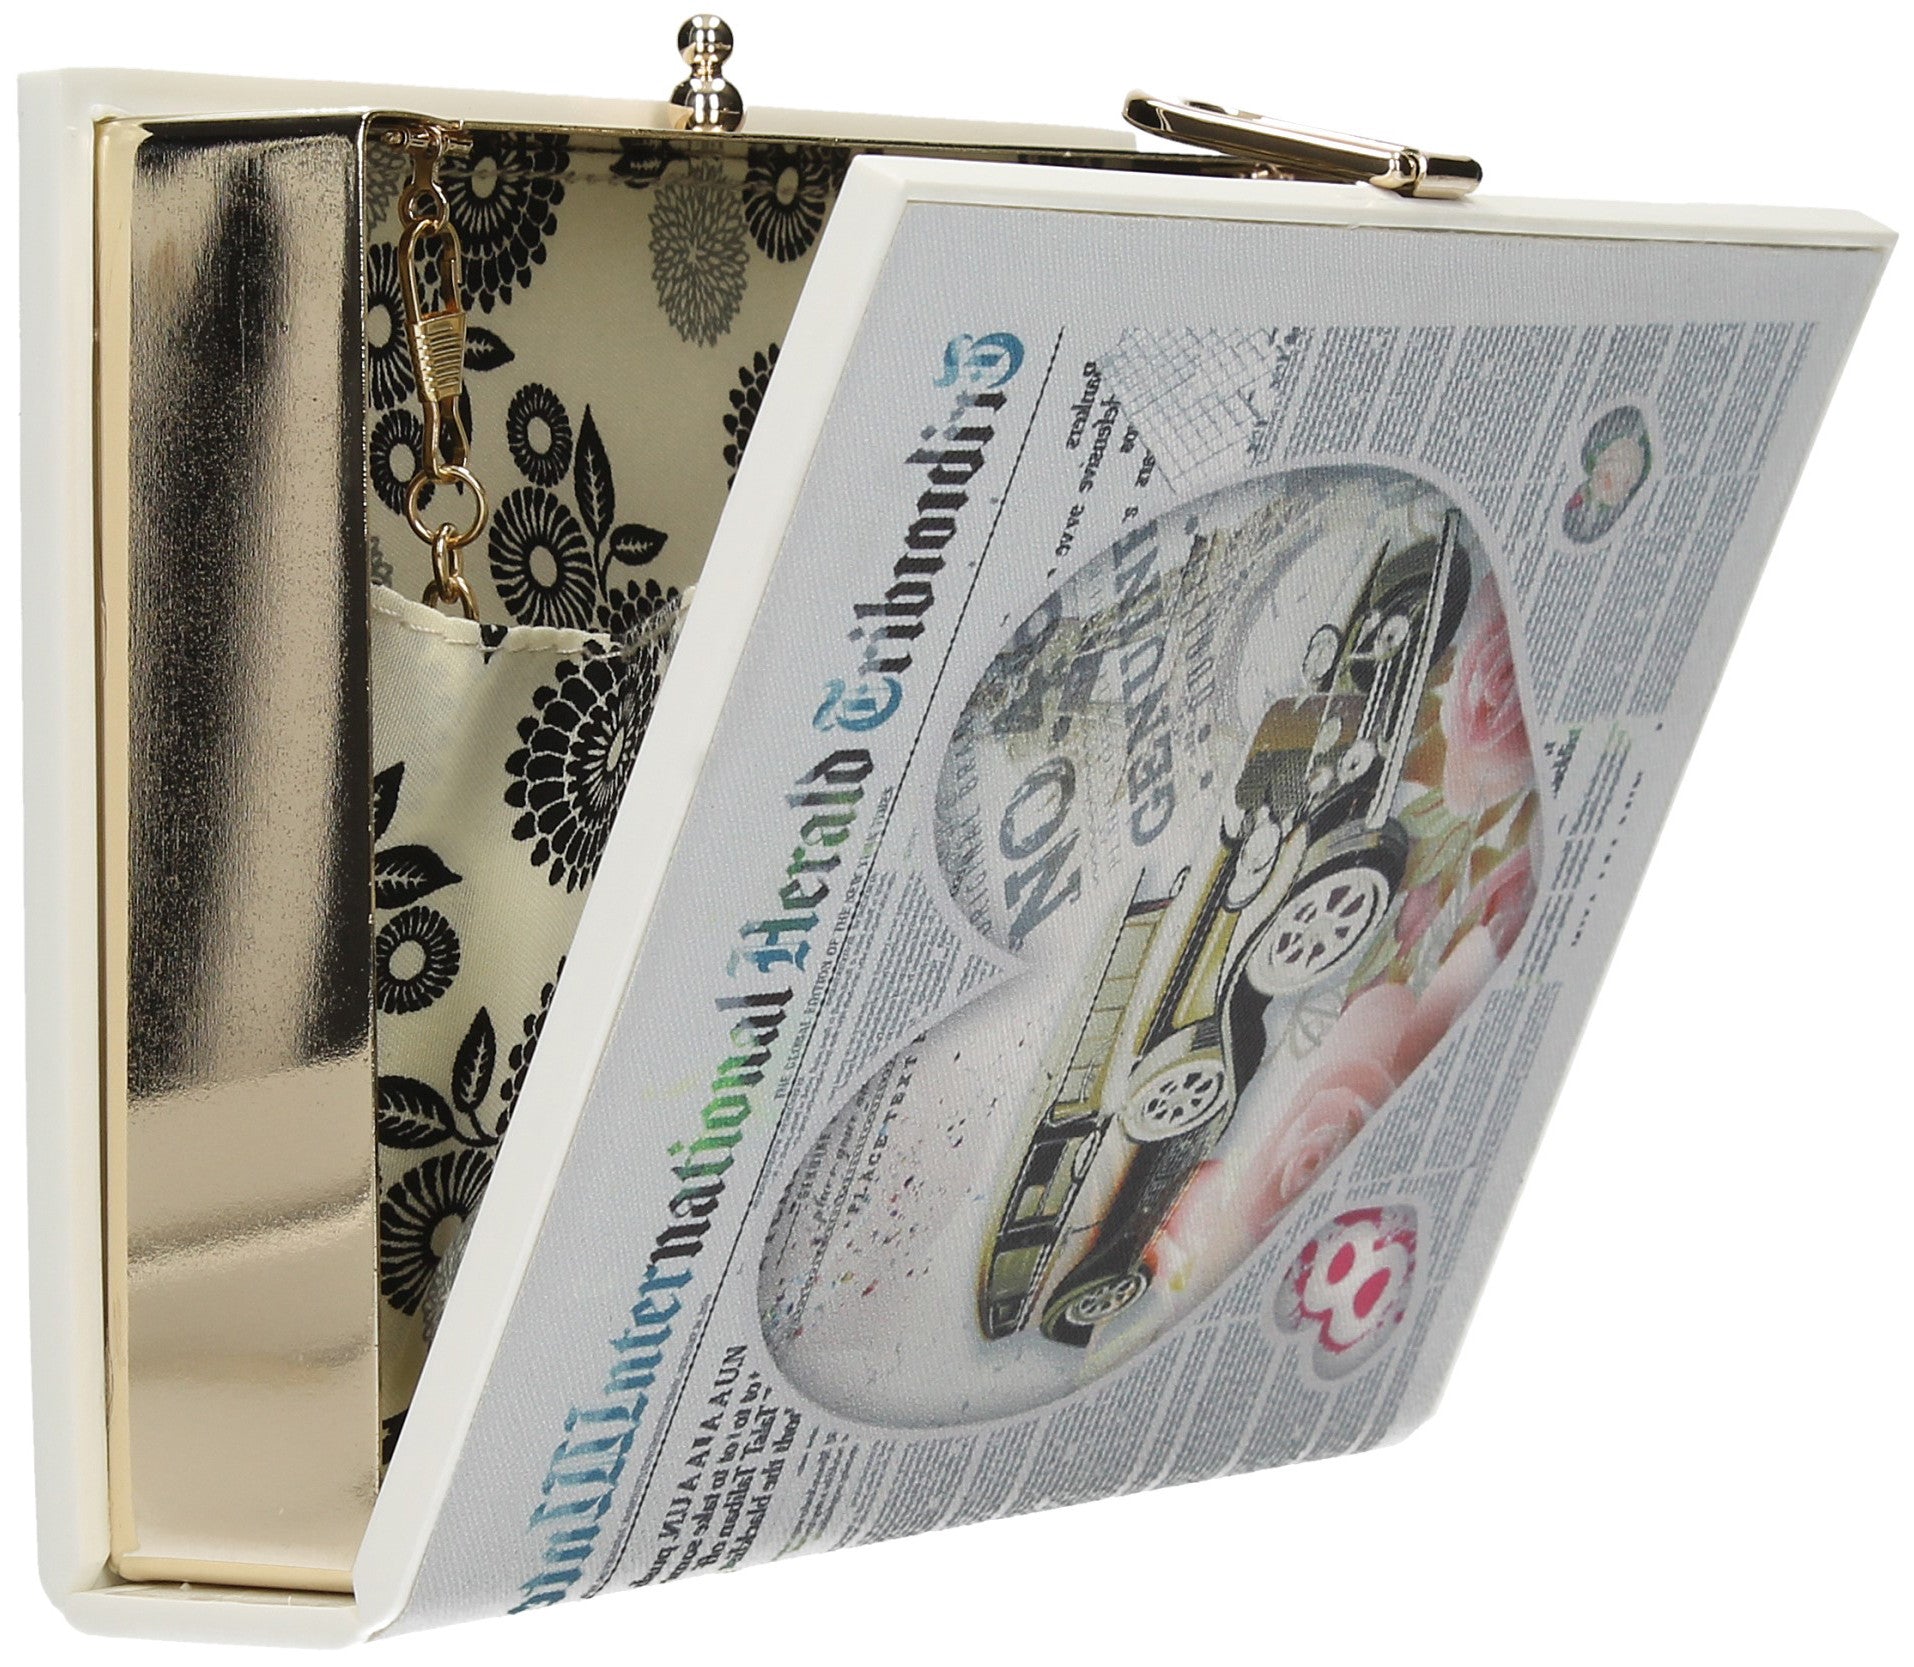 SWANKYSWANS Quirky Newspaper Box Clutch Cute Cheap Clutch Bag For Weddings School and Work